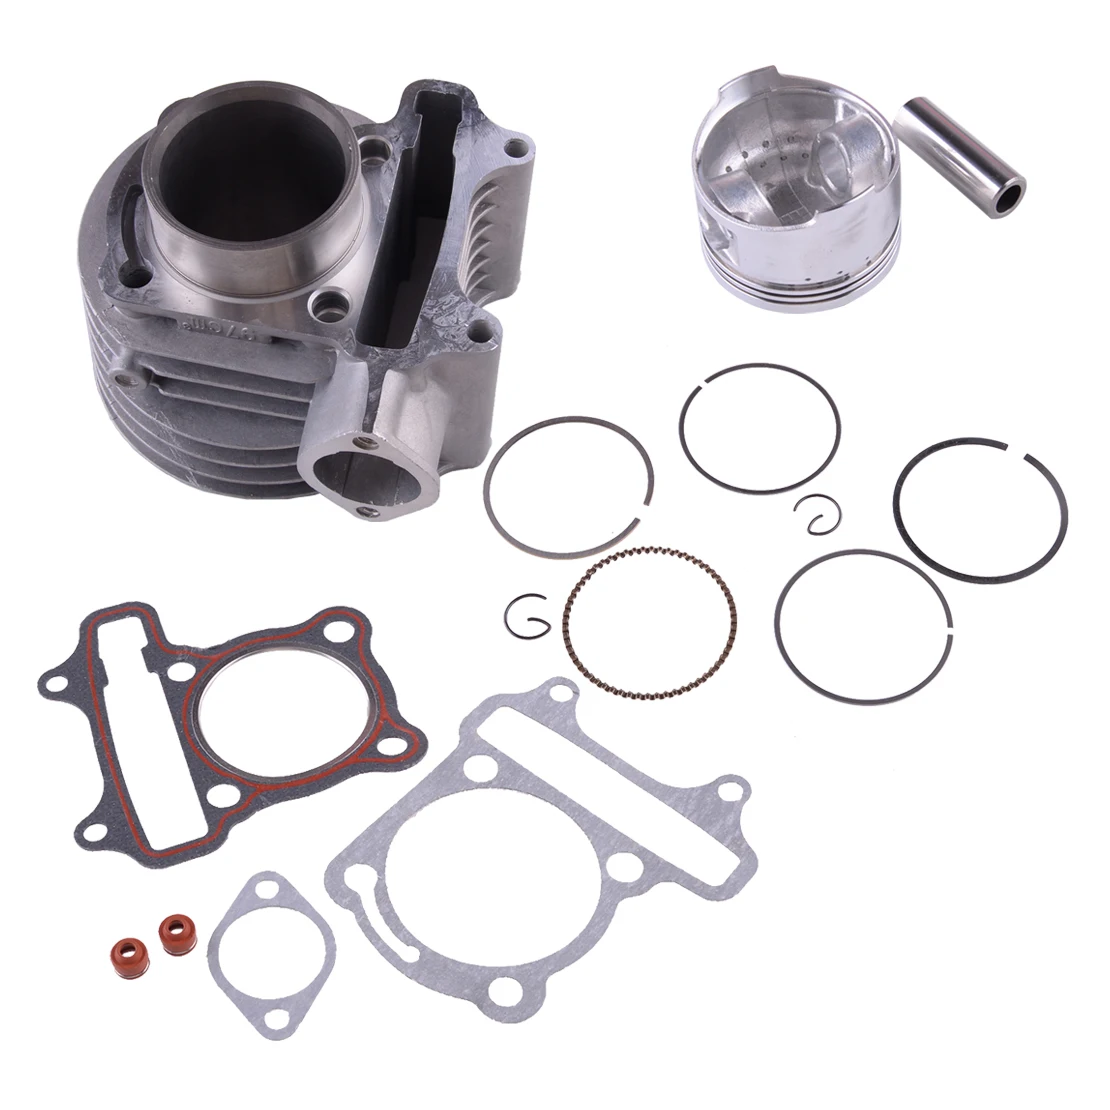 

Silver Big Bore 50mm Cylinder Kit With Piston Ring Pin Fit for 139QMB GY6 50cc 80cc 100cc Scooter Moped Parts Accessories